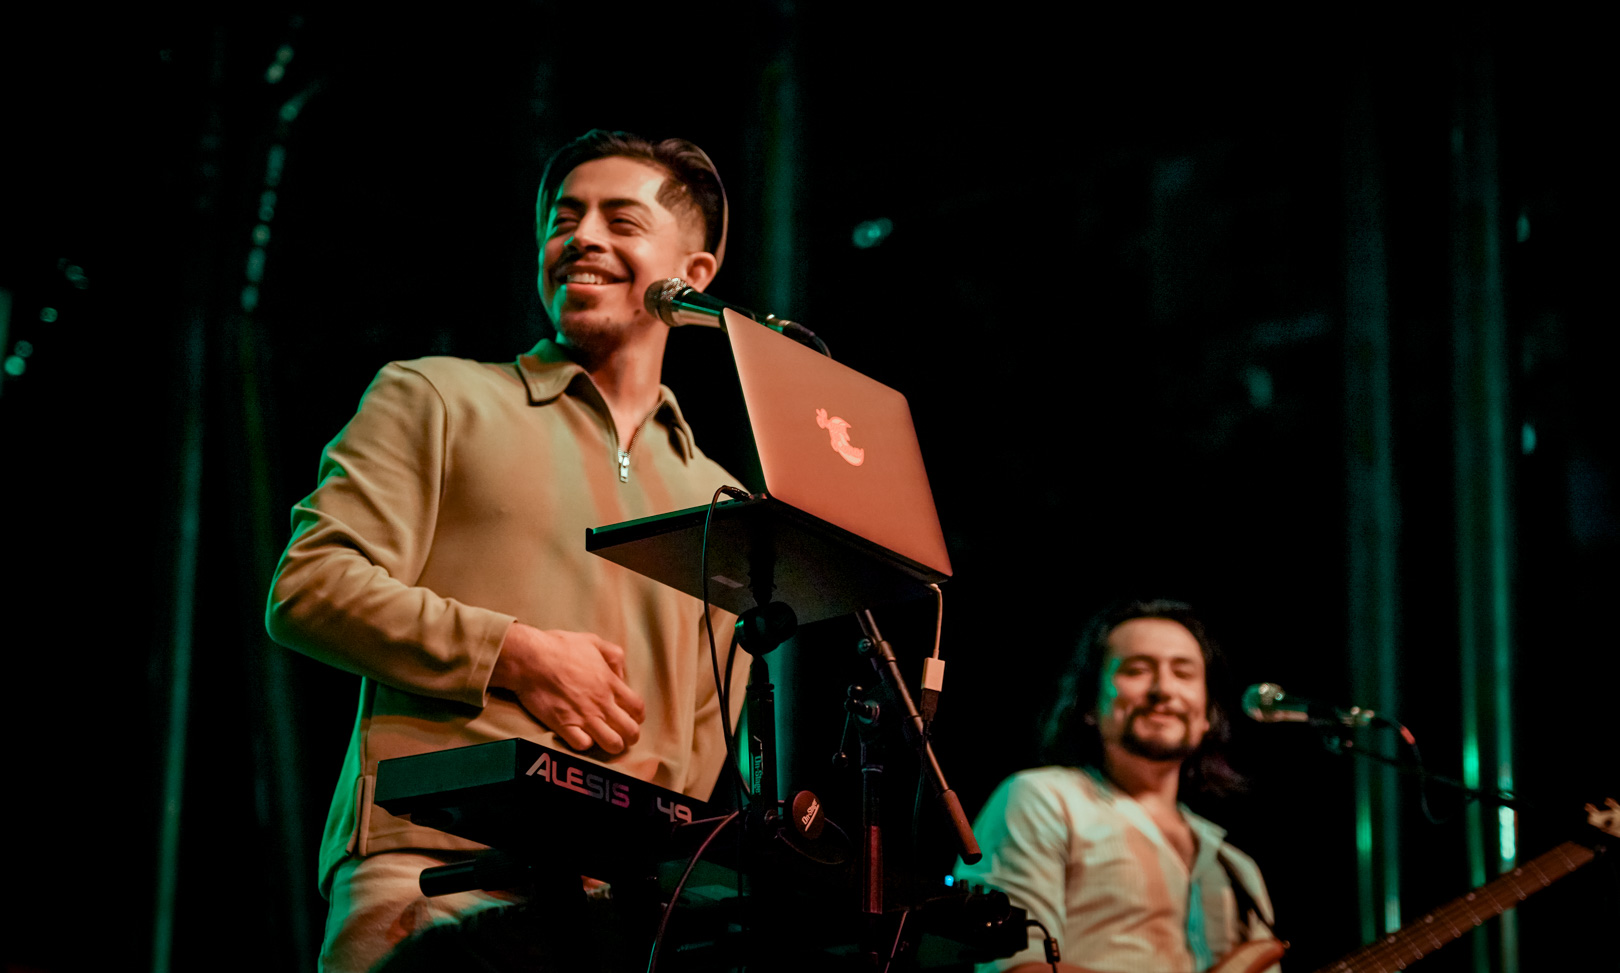 Two performers smiling on stage